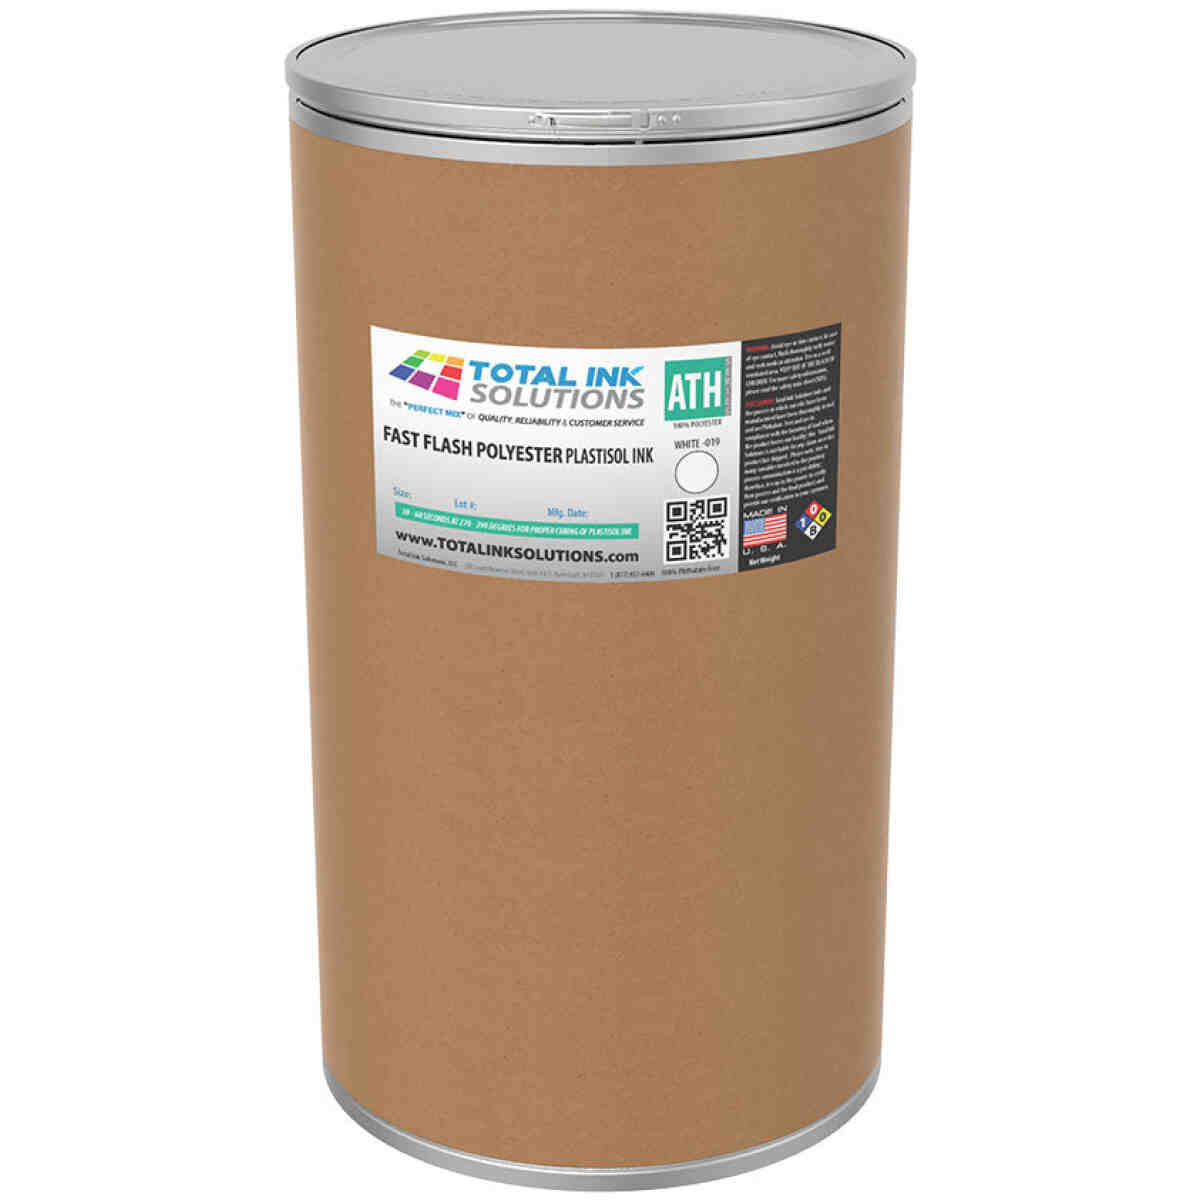 Fast Flash Athletic 100% Polyester Plastisol Ink - White - 55 Gallons TOTAL INK SOLUTIONS®